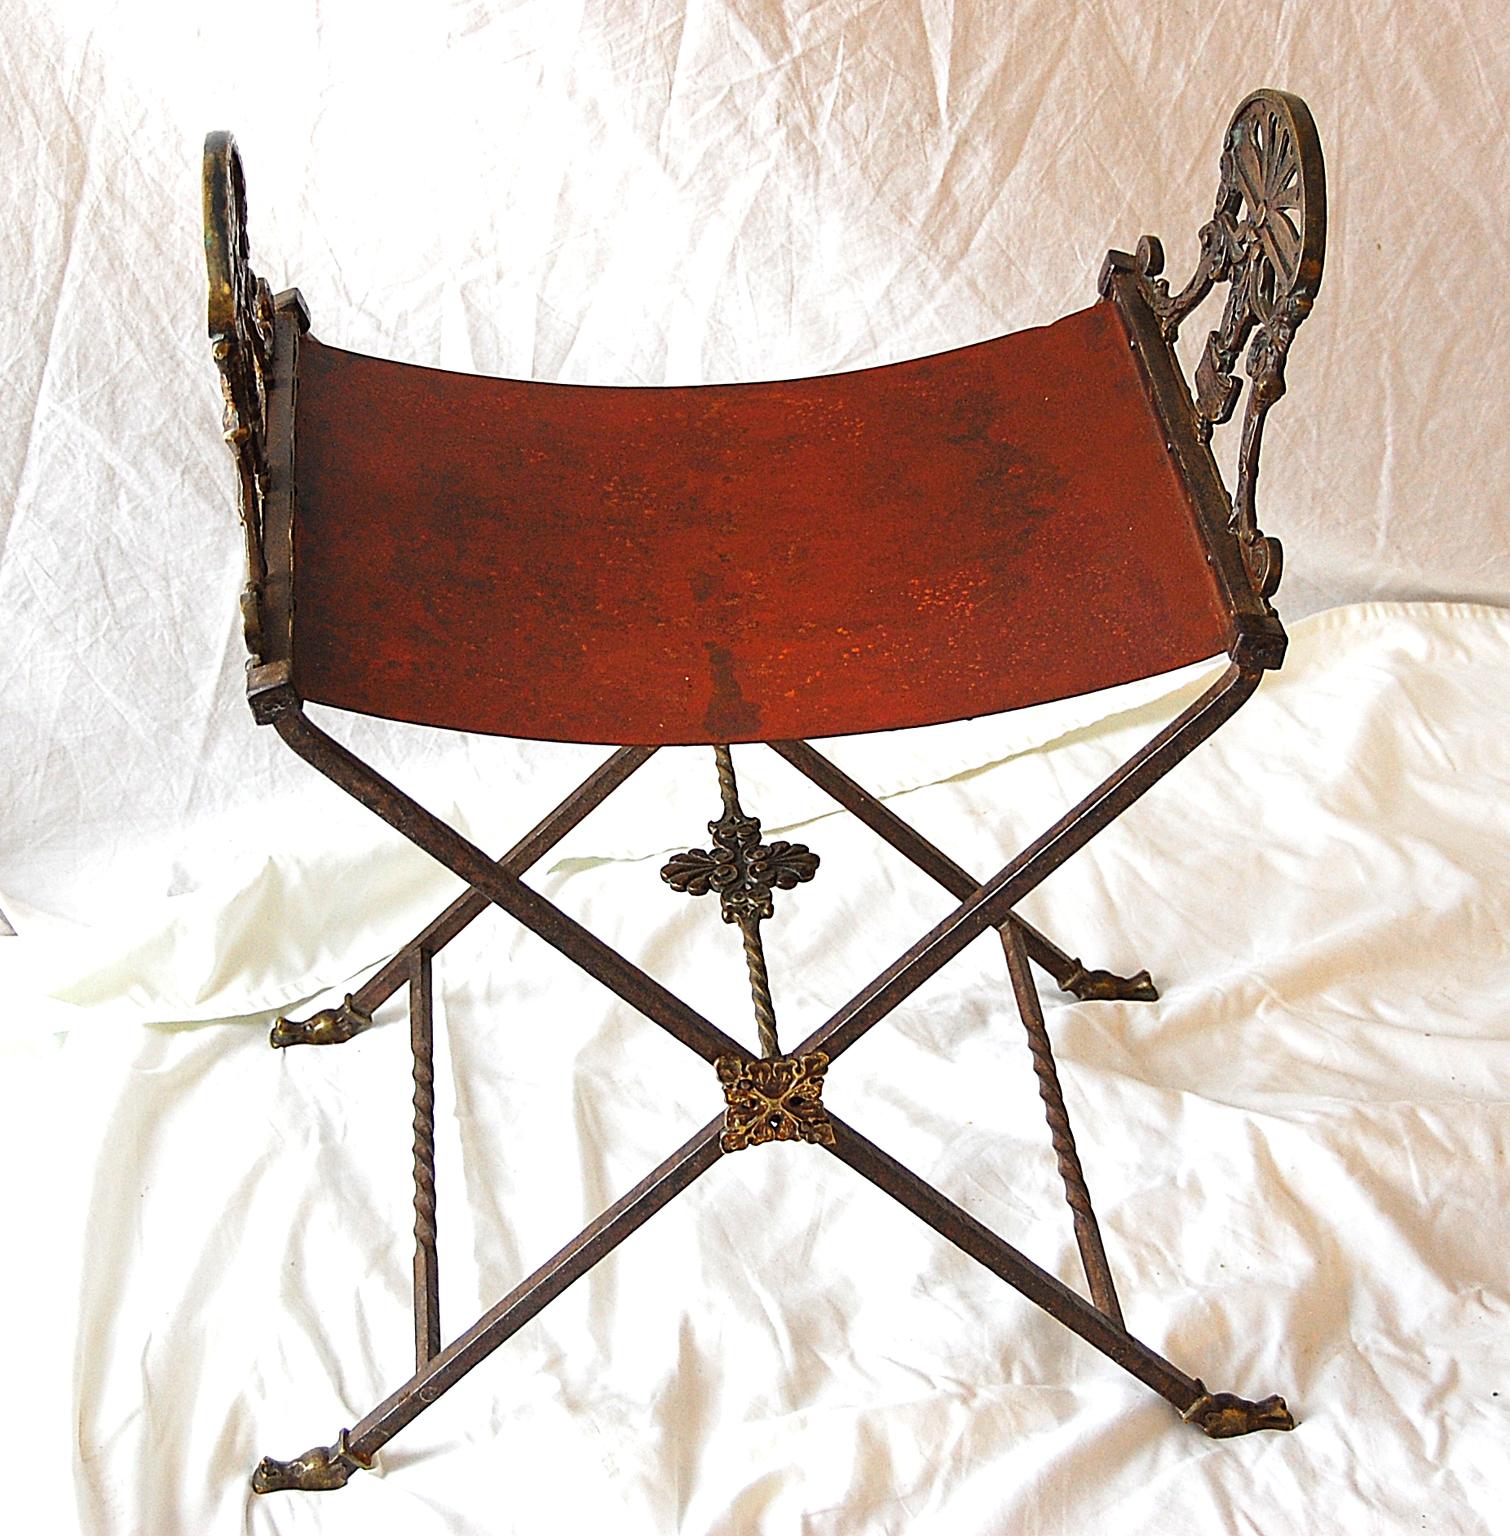 French Second Empire period cast bronze X frame stool with shaped iron seat, original finish including old red color to seat, classical heads to armrests and animal heads that terminate the X frame. This is a heavy yet comfortable stool, circa 1850.